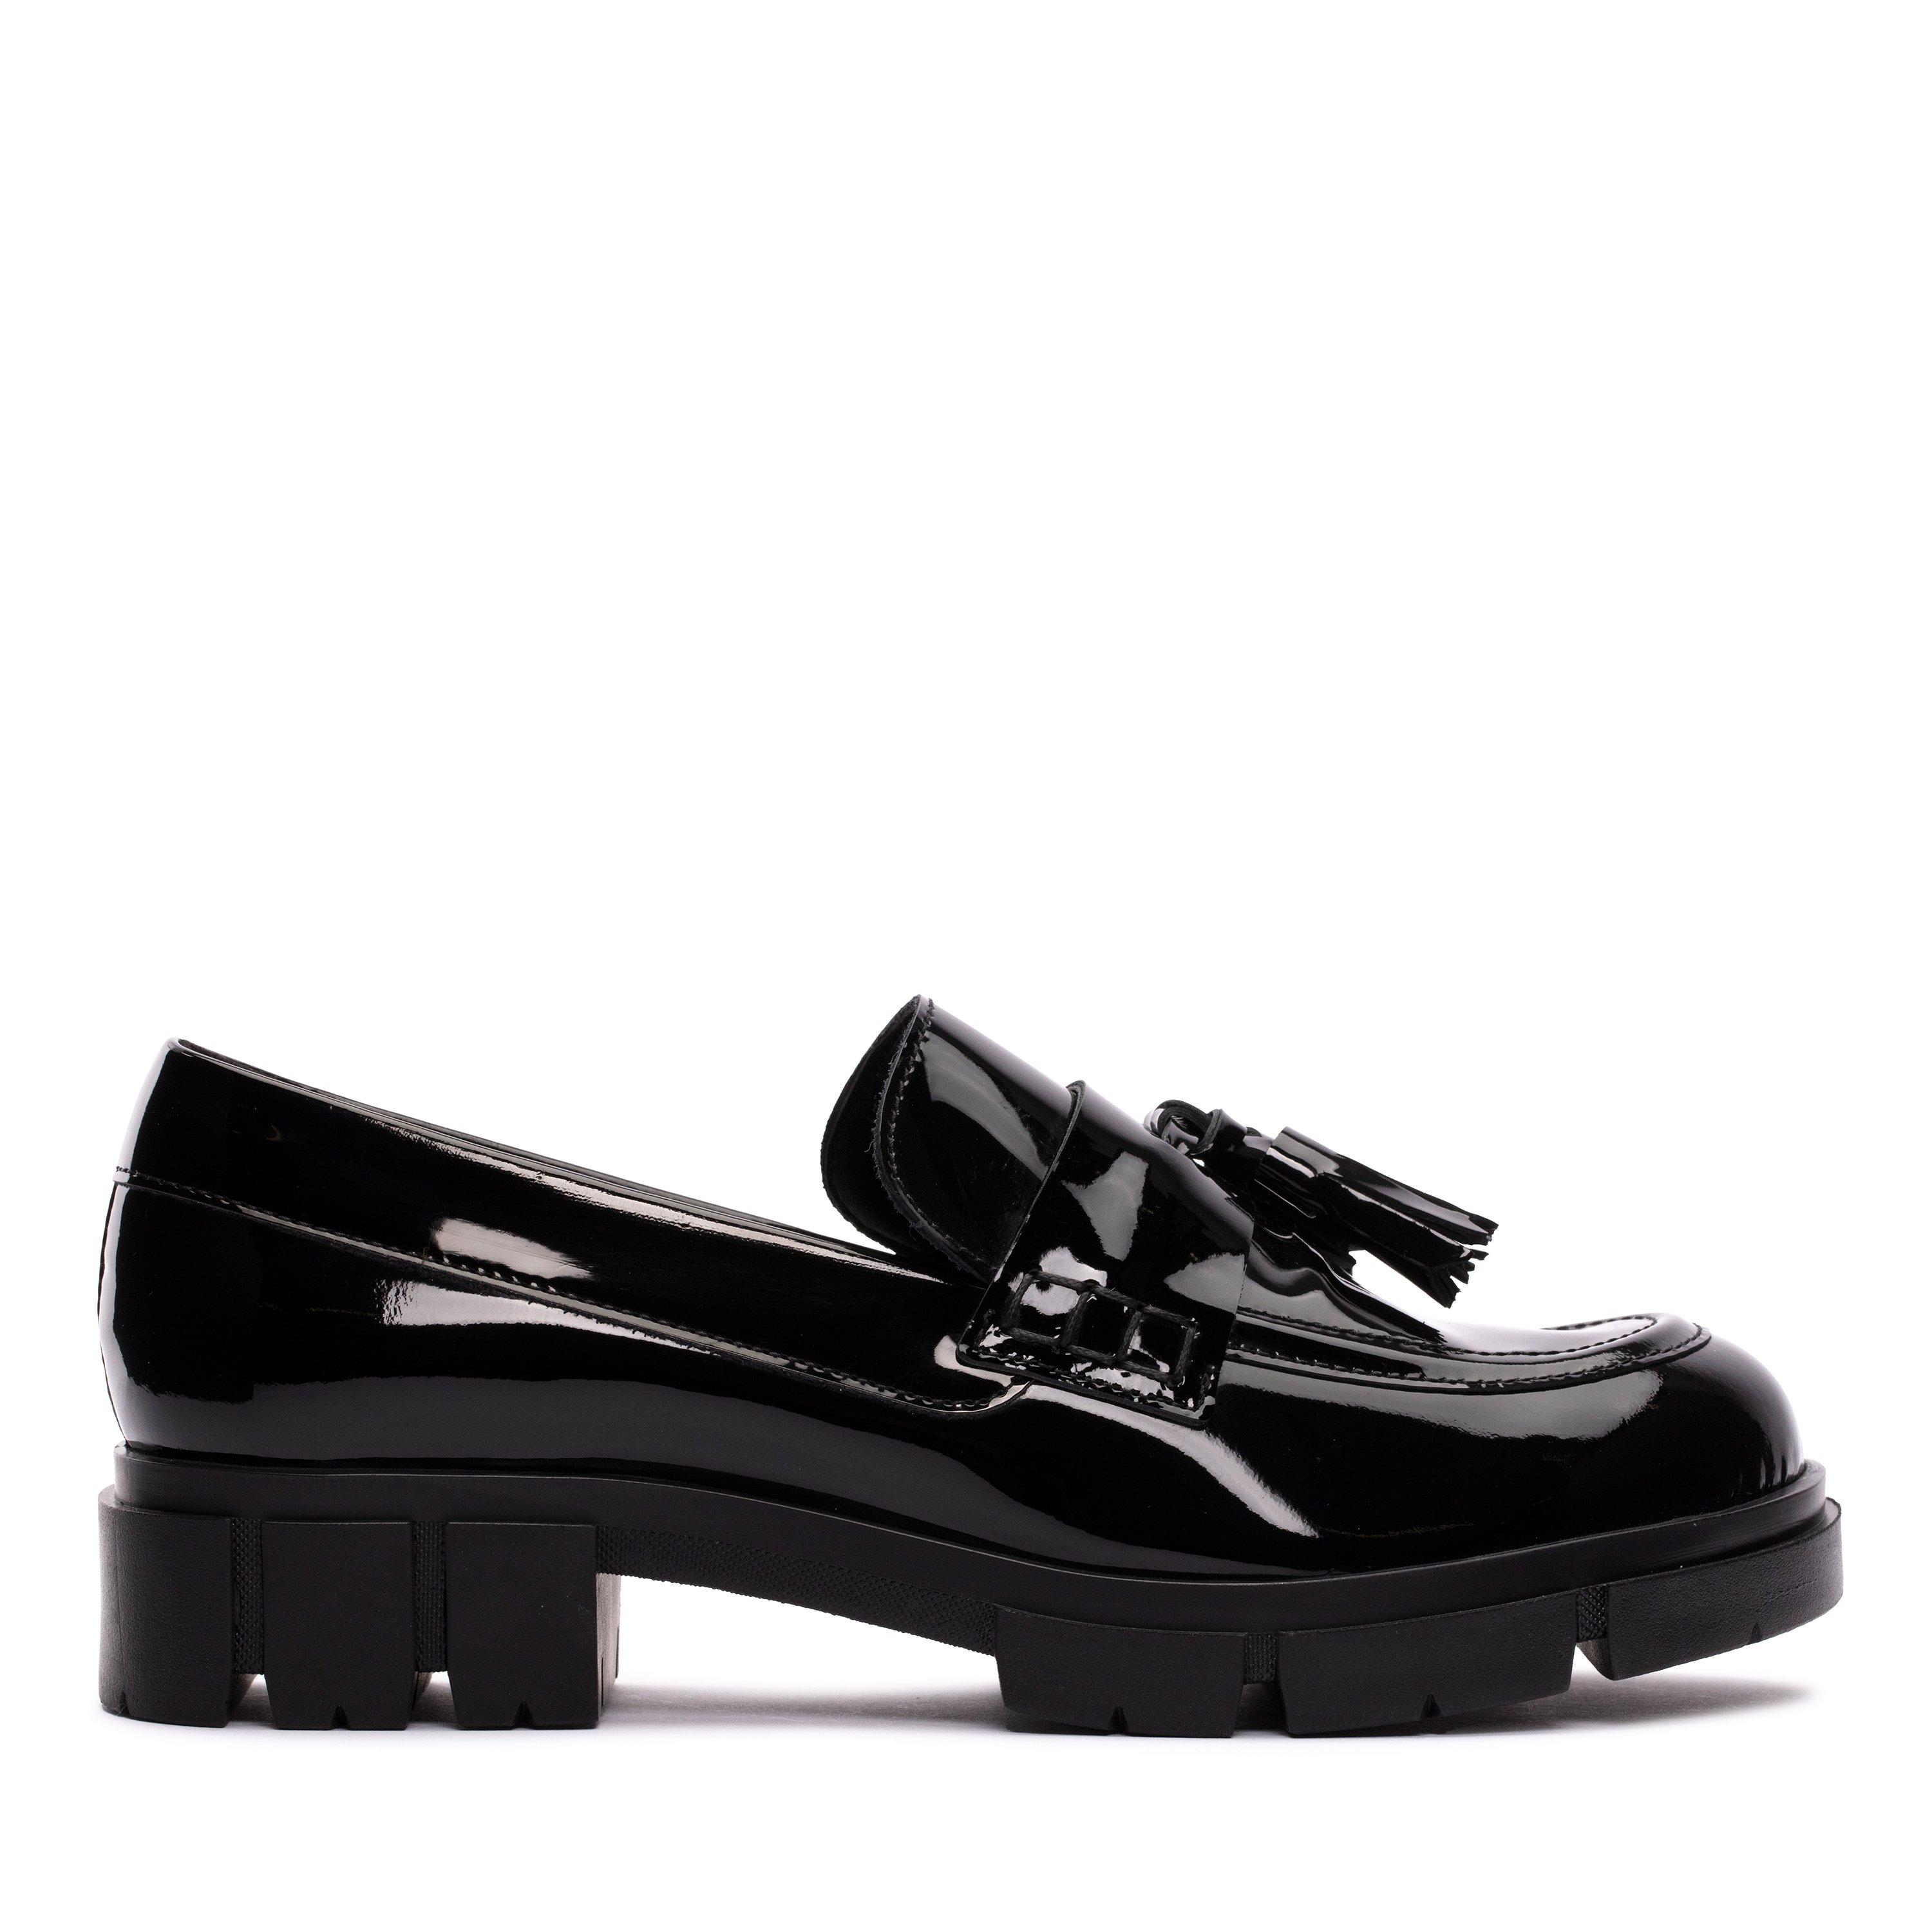 Clarks Teala Loafer Womens Loafers Colour: Black Patent, Size: 3